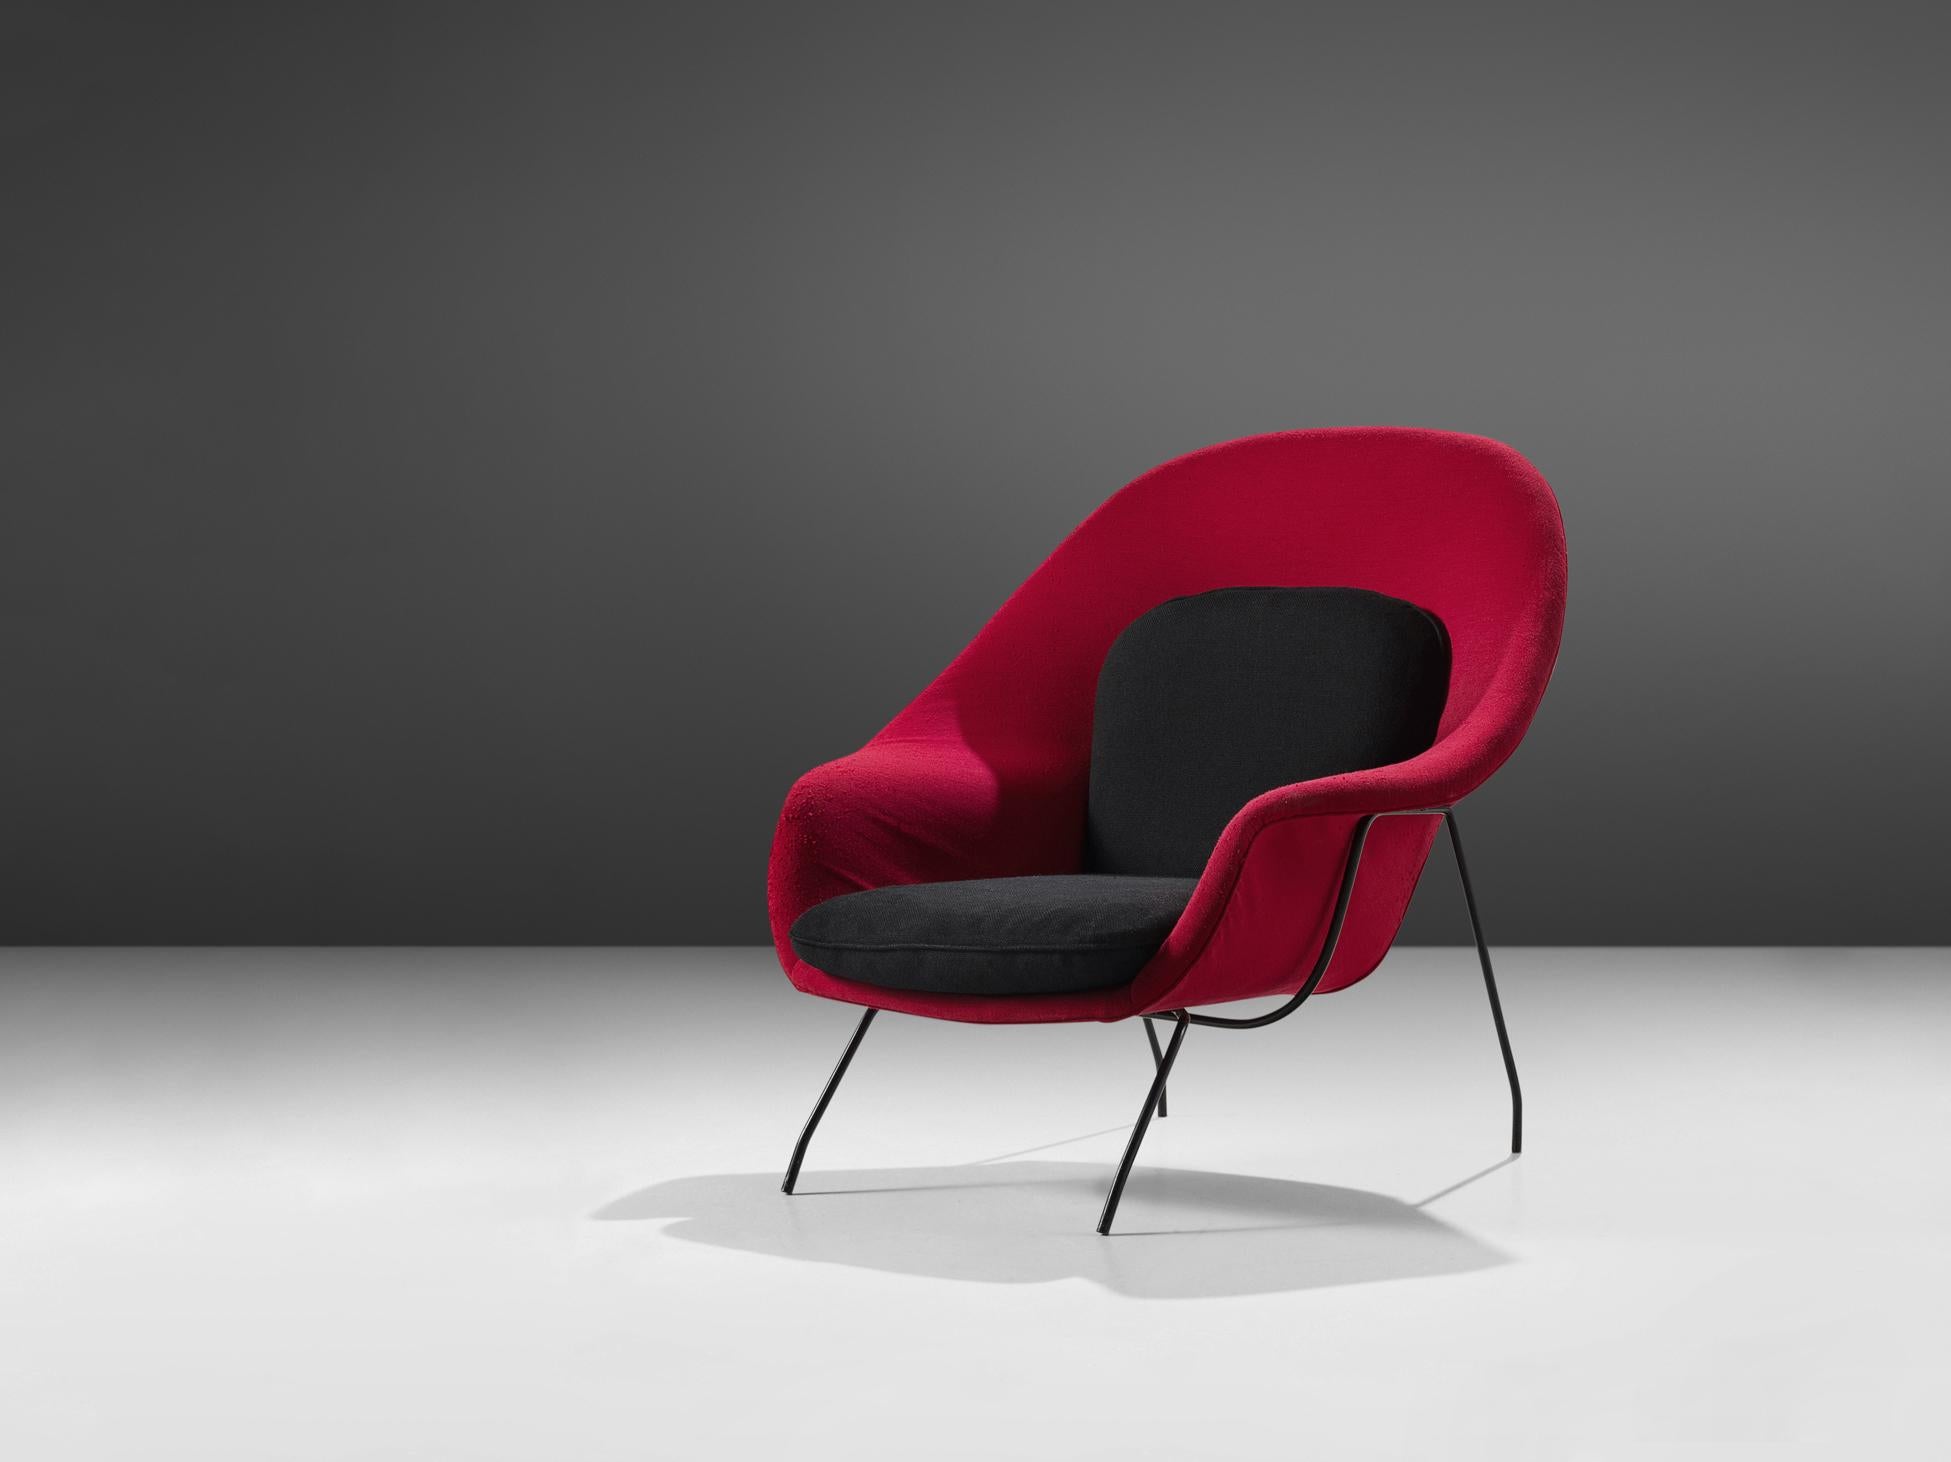 Eero Saarinen for Knoll, 'Womb' easy chair, fabric, coated steel, United States, design 1948

This shelled, cushioned lounge chair ‘Womb’ was designed between 1946 and 1948 by Eero Saarinen. The chair was a specific request by Florence Knoll, who